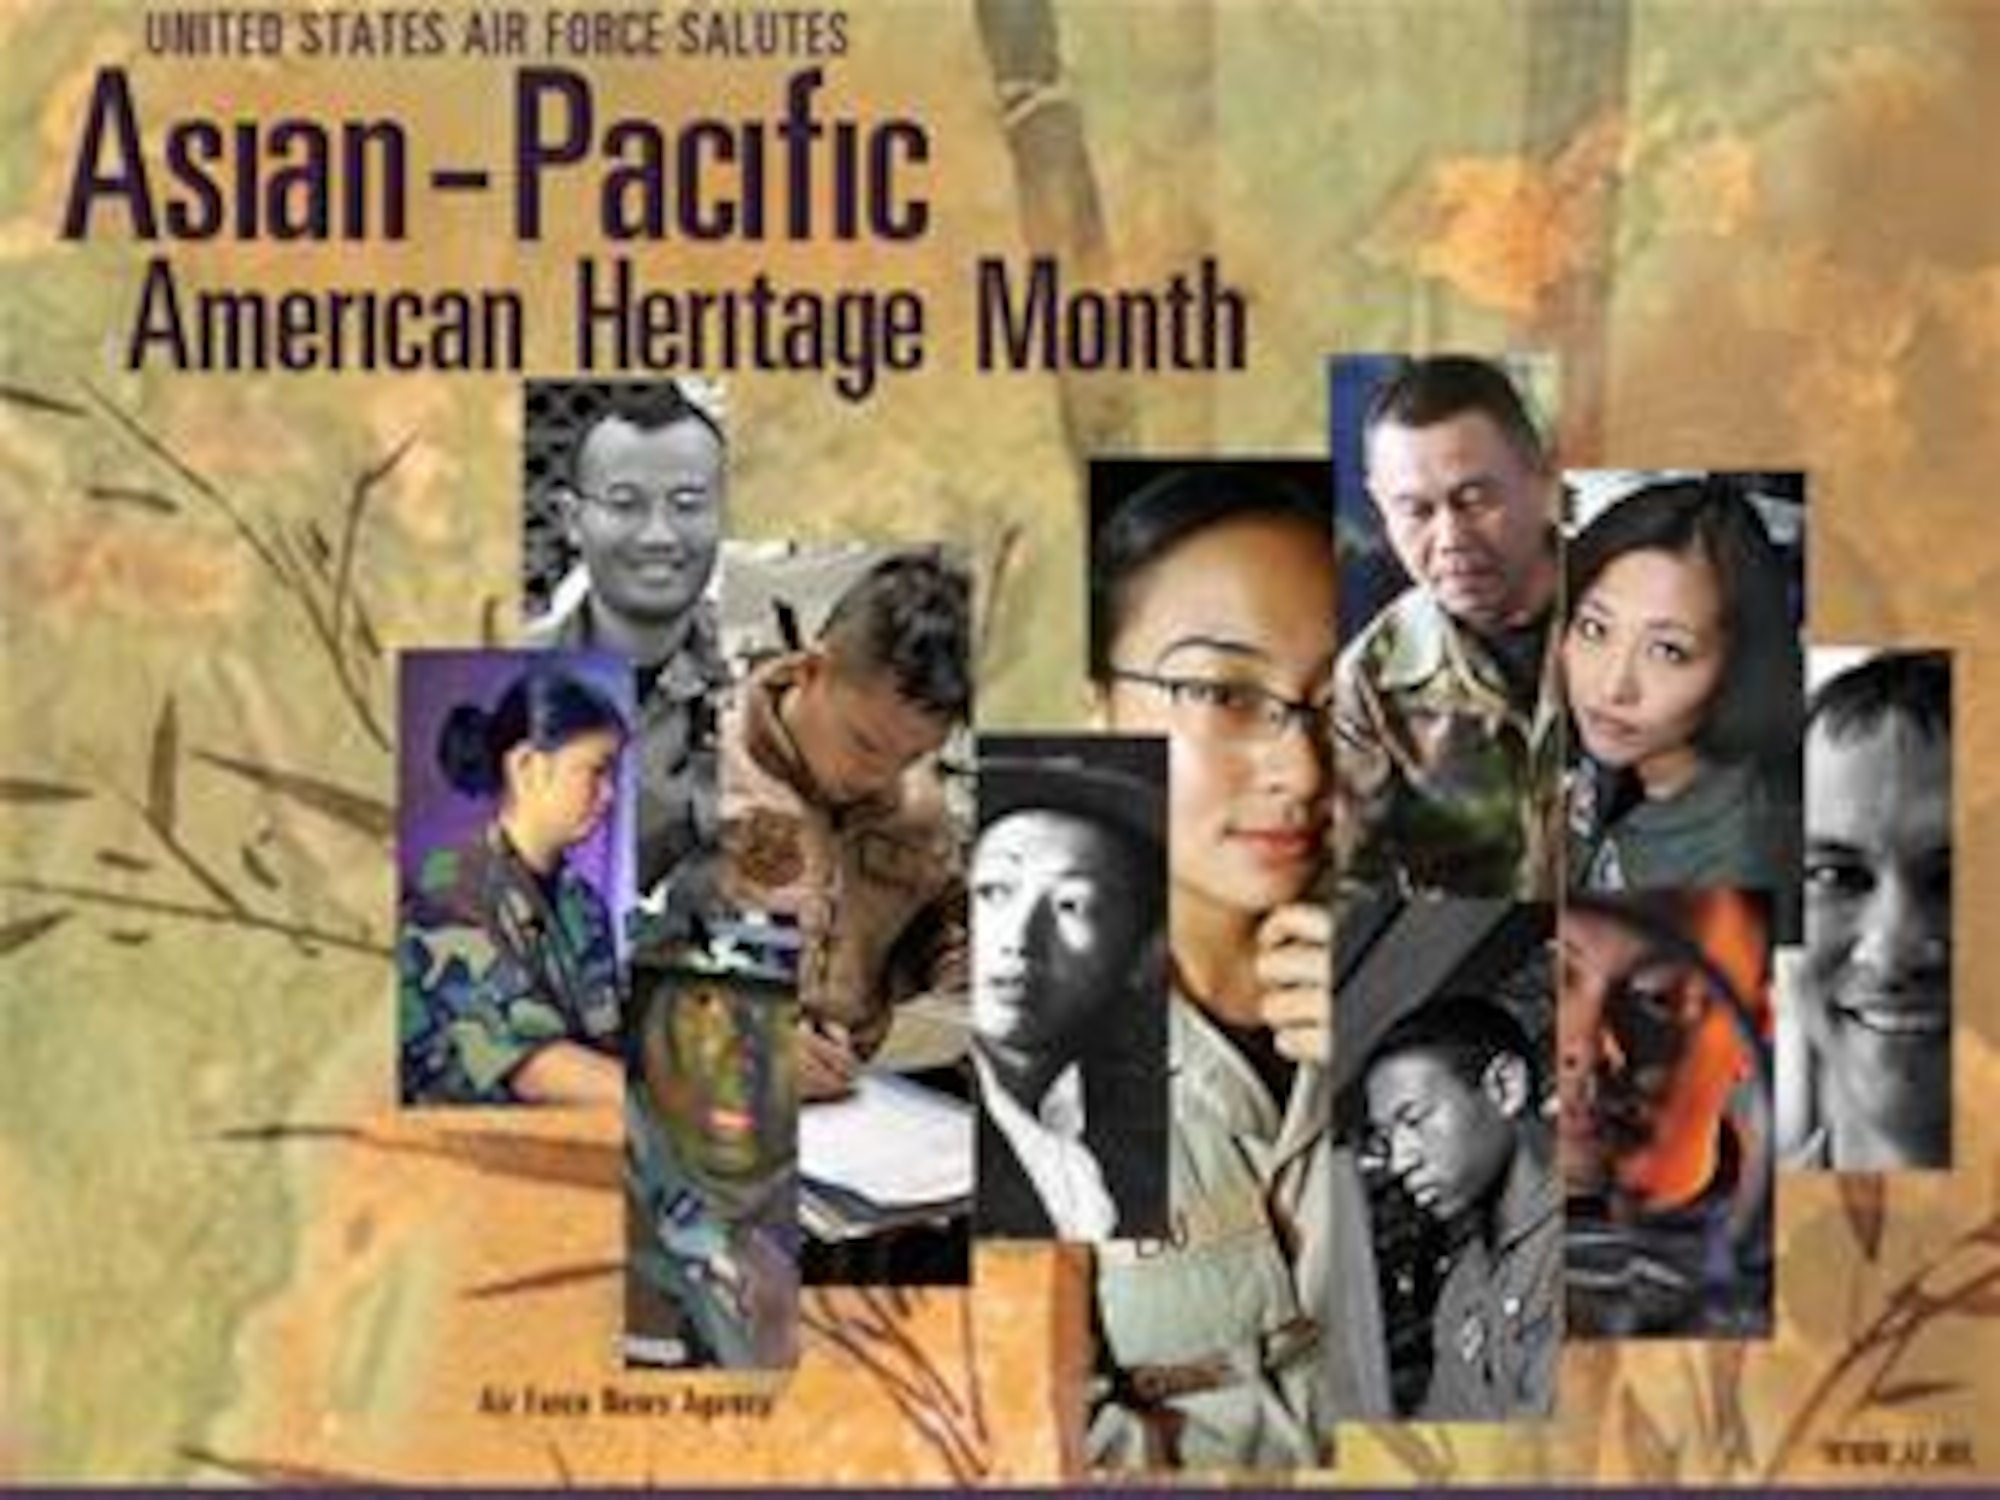 Asian-Pacific Islander American Heritage Month Wallpaper #1, 640x480. Created by Billy Smallwood of the Air Force News Agency. INSTRUCTIONS FOR USING WALLPAPER: Getting Started: The wallpaper should first be downloaded to a folder on your computer. You can either create a new folder or place the image in an existing folder. Windows XP Users: Select “Start,” open “Control Panel” and select the “Display” icon to open the Display Properties panel. From the tabs across the top select “Desktop” and scroll through the “Background” selection box, to select “Browse.” Navigate to the folder where you stored the wallpaper. Select and “Apply” the wallpaper and close the Display Properties window. MAC OSX Users: Open “System Preferences” from the Drop down Apple icon. Select the “Desktop & Screen Saver” icon. Select “Desktop” from the box at the upper center of the page. Then select “Choose Folder” in the scroll down box. Navigate to the folder where you stored the wallpaper. Once you have selected the wallpaper “Apply” it and then close the Desktop & Screensaver window.